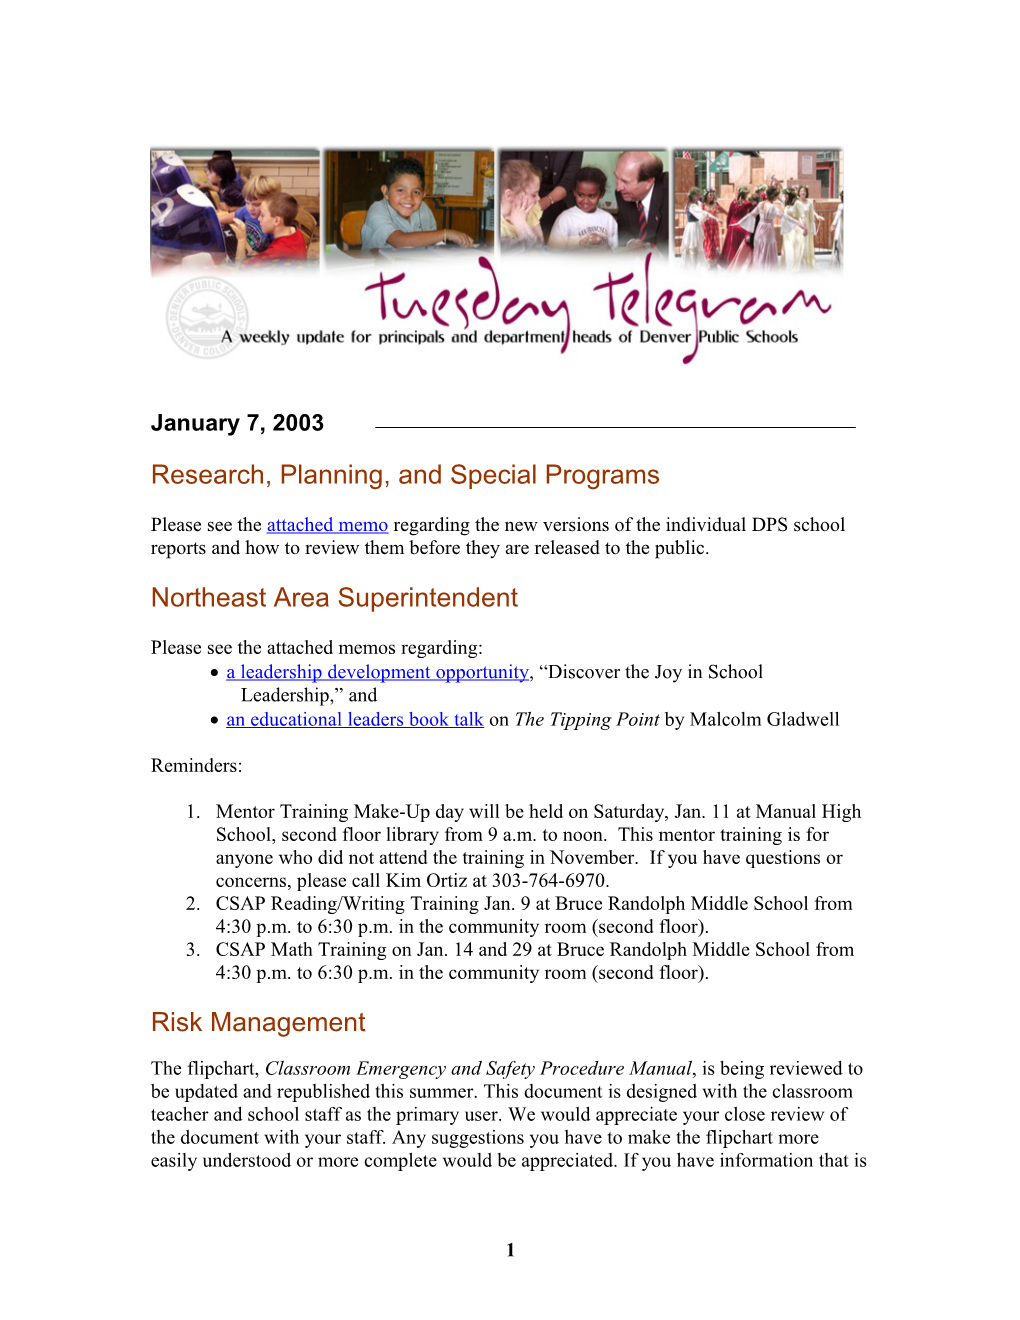 Research, Planning, and Special Programs